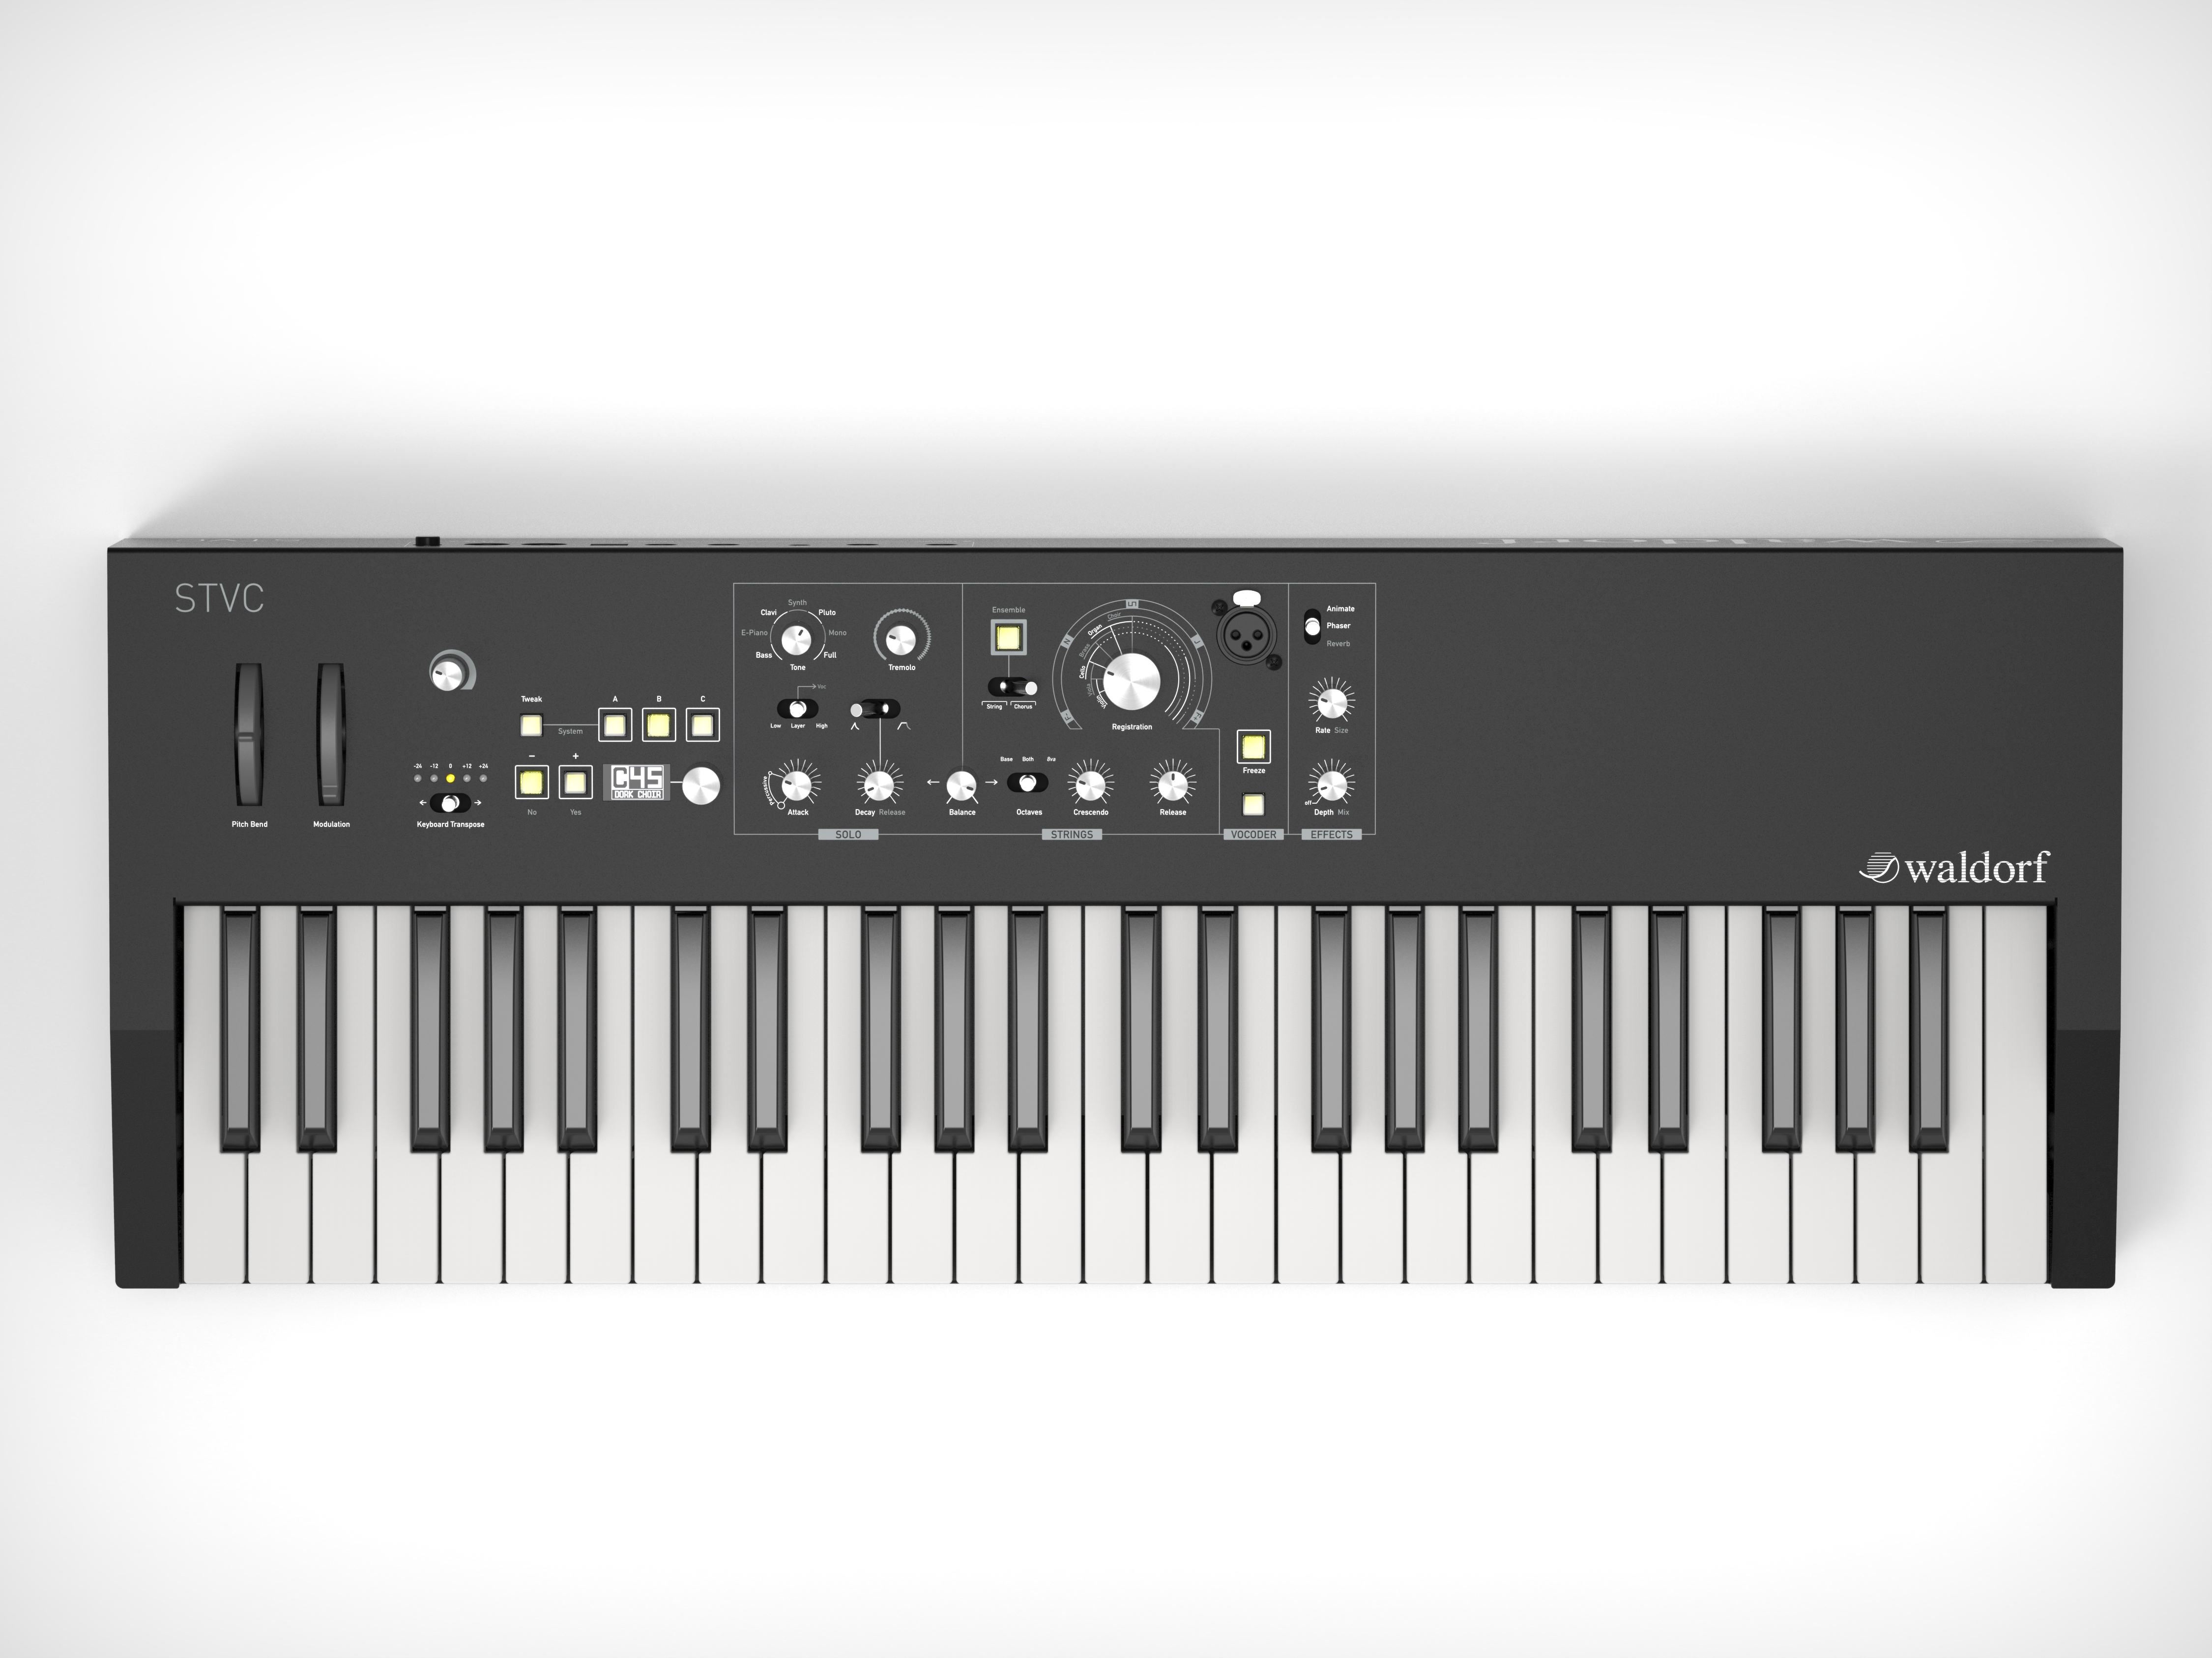 Waldorf Stvc - Synthesizer - Main picture